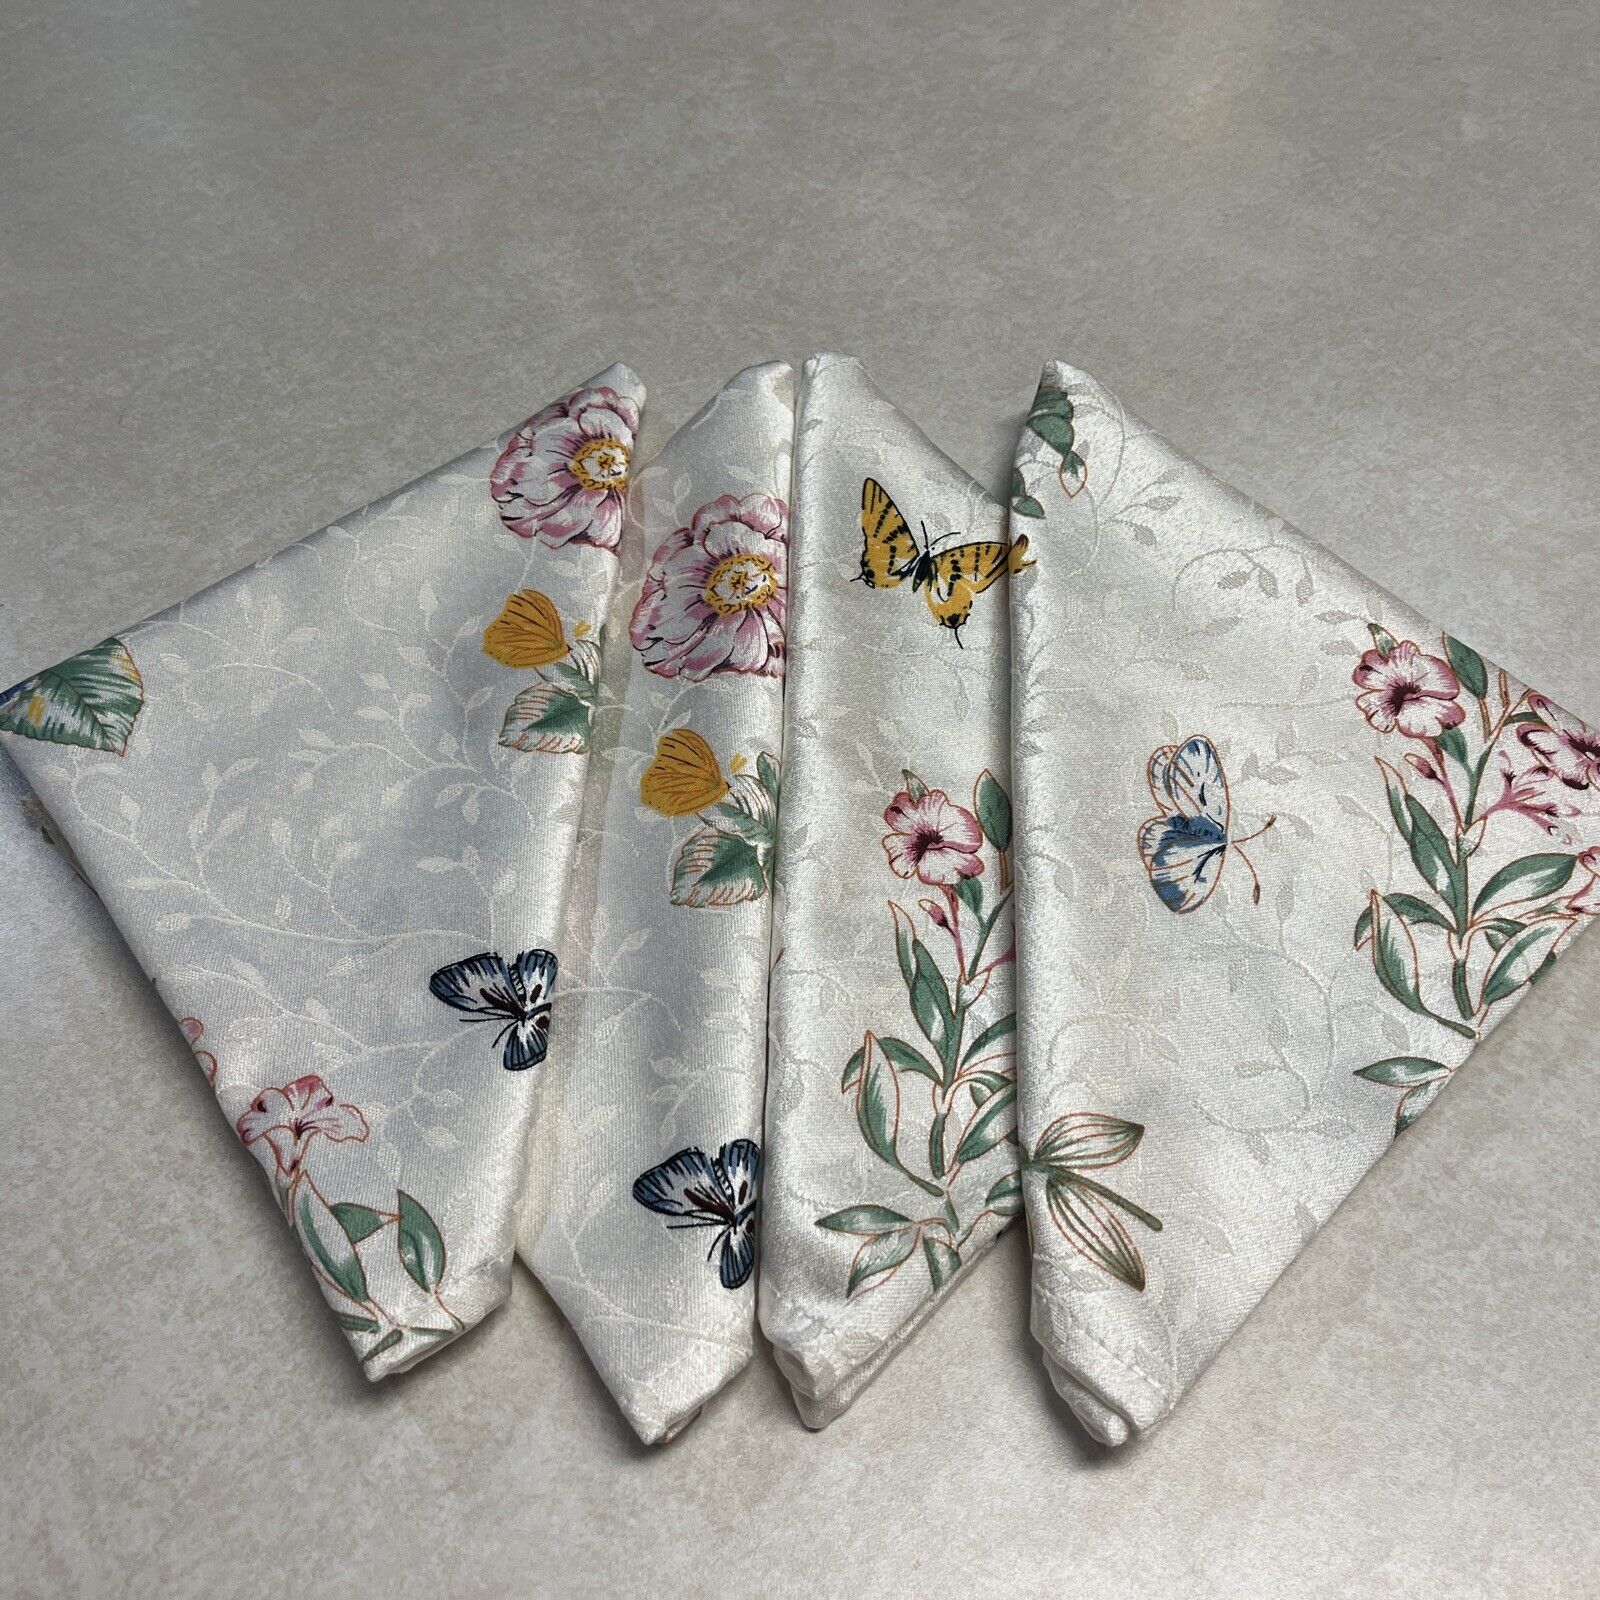 4- Lenox Butterfly Meadow Cloth Napkins  Never Been Used